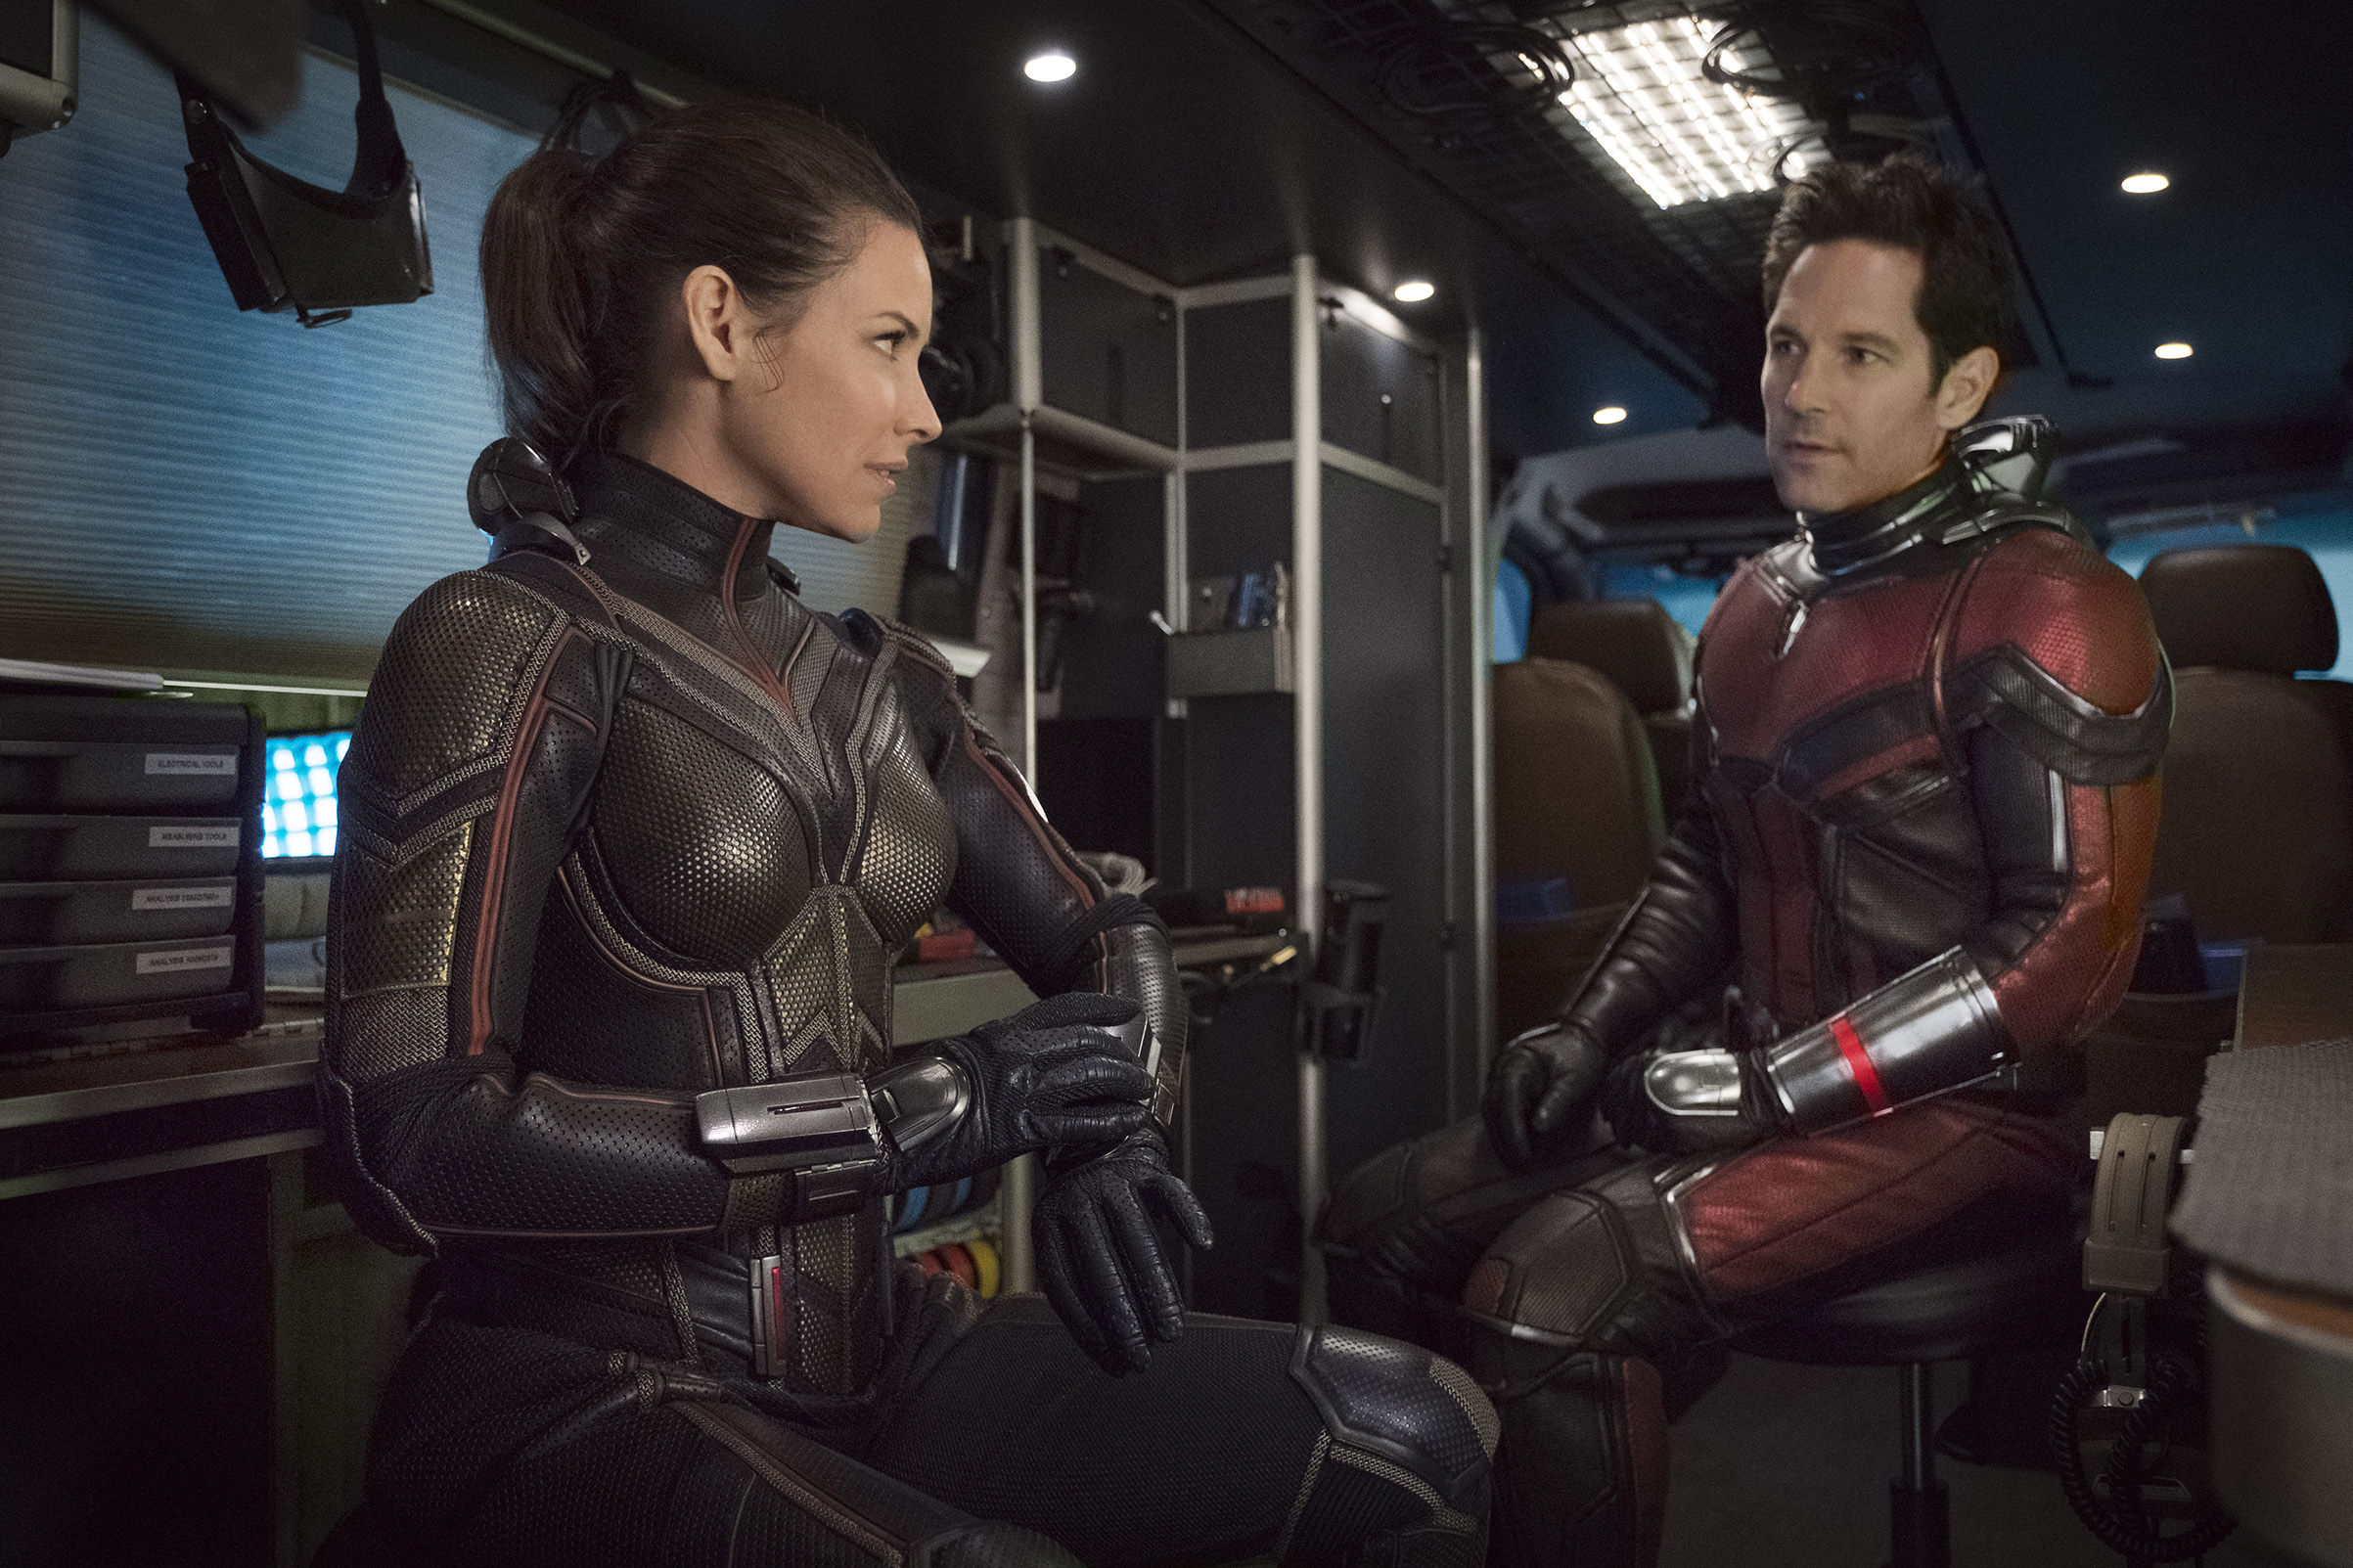 Paul Rudd and Evangeline Lilly in “Ant-Man and the Wasp”. (Marvel Studios)